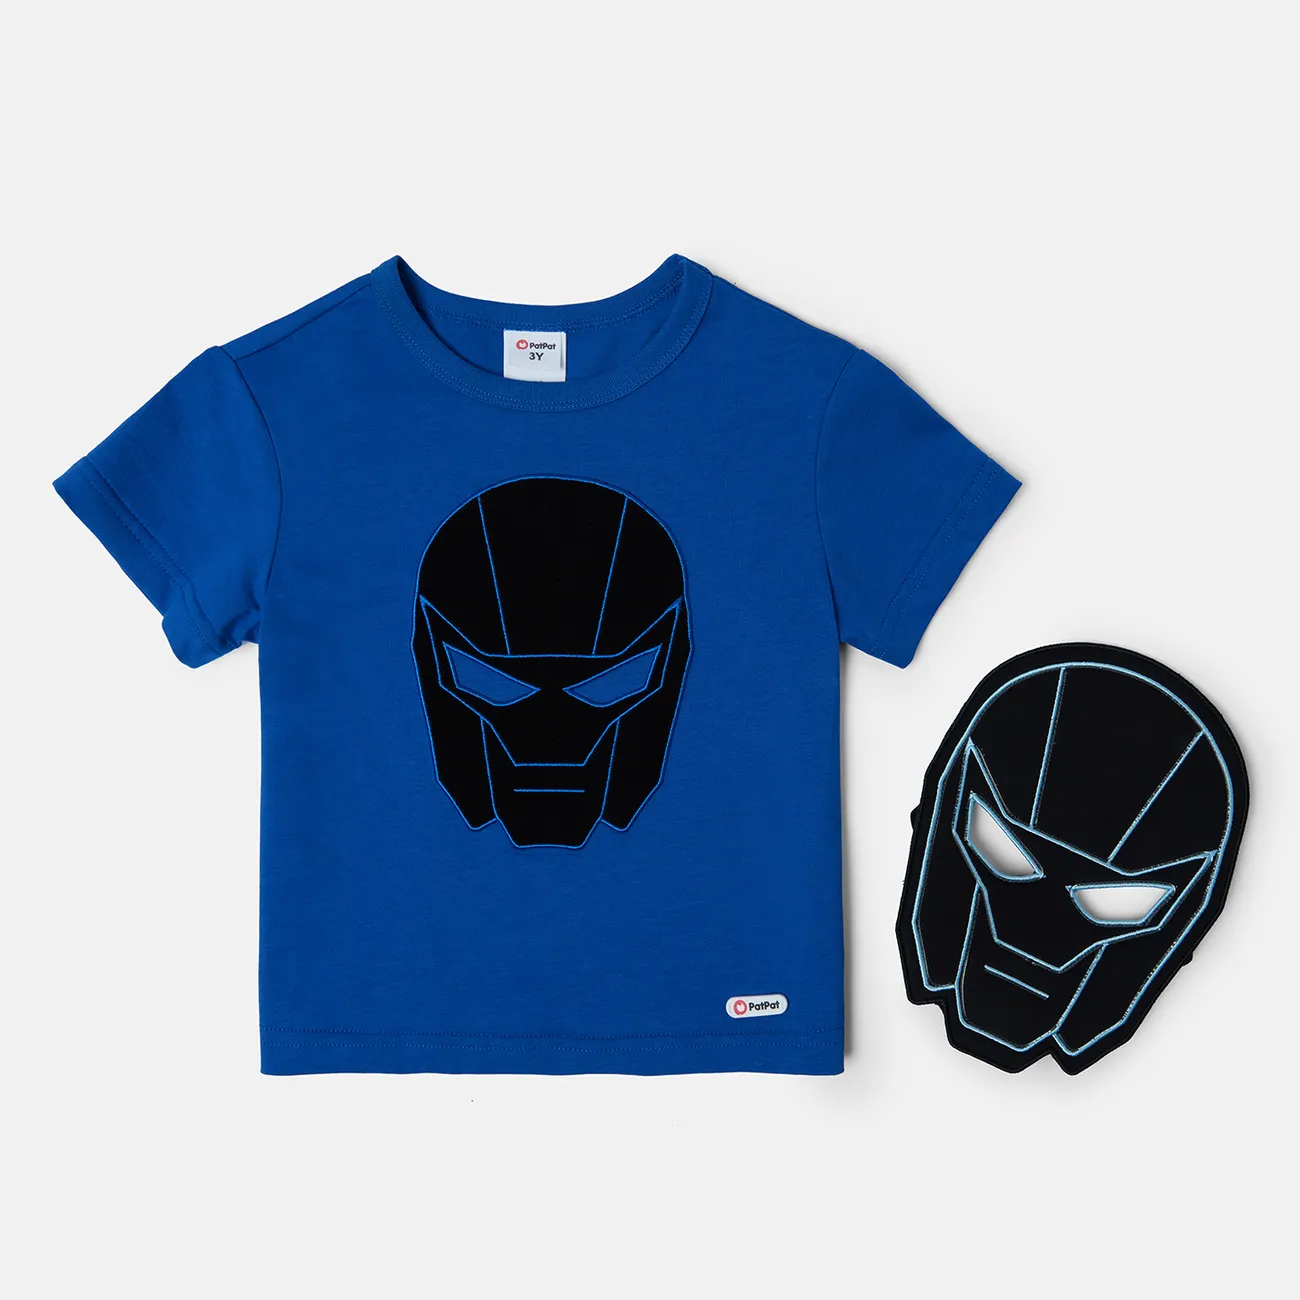 Go-Glow Illuminating T-shirt with Removable Light Up Mask Including Controller (Built-In Battery) Blue big image 1